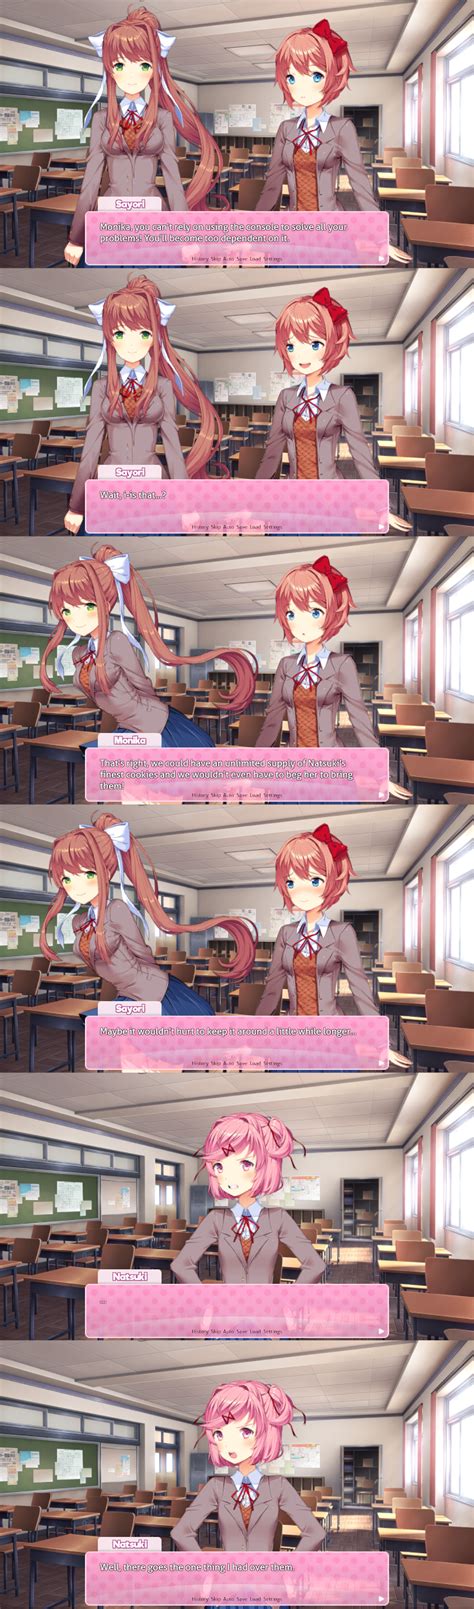 What To Do With The Command Console Rddlc